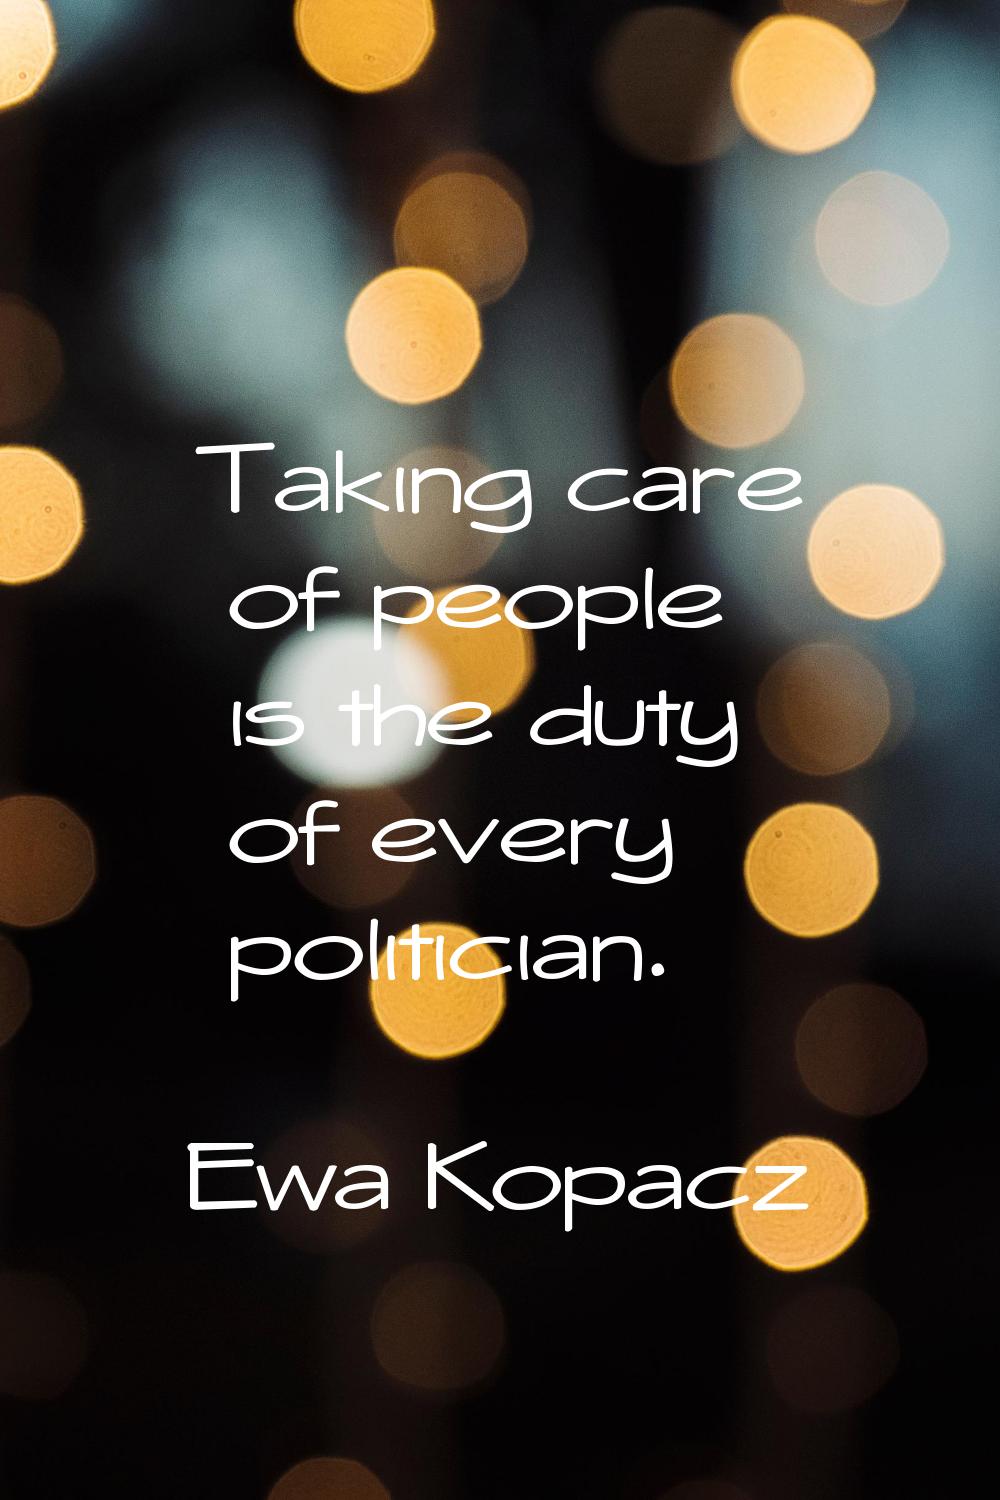 Taking care of people is the duty of every politician.